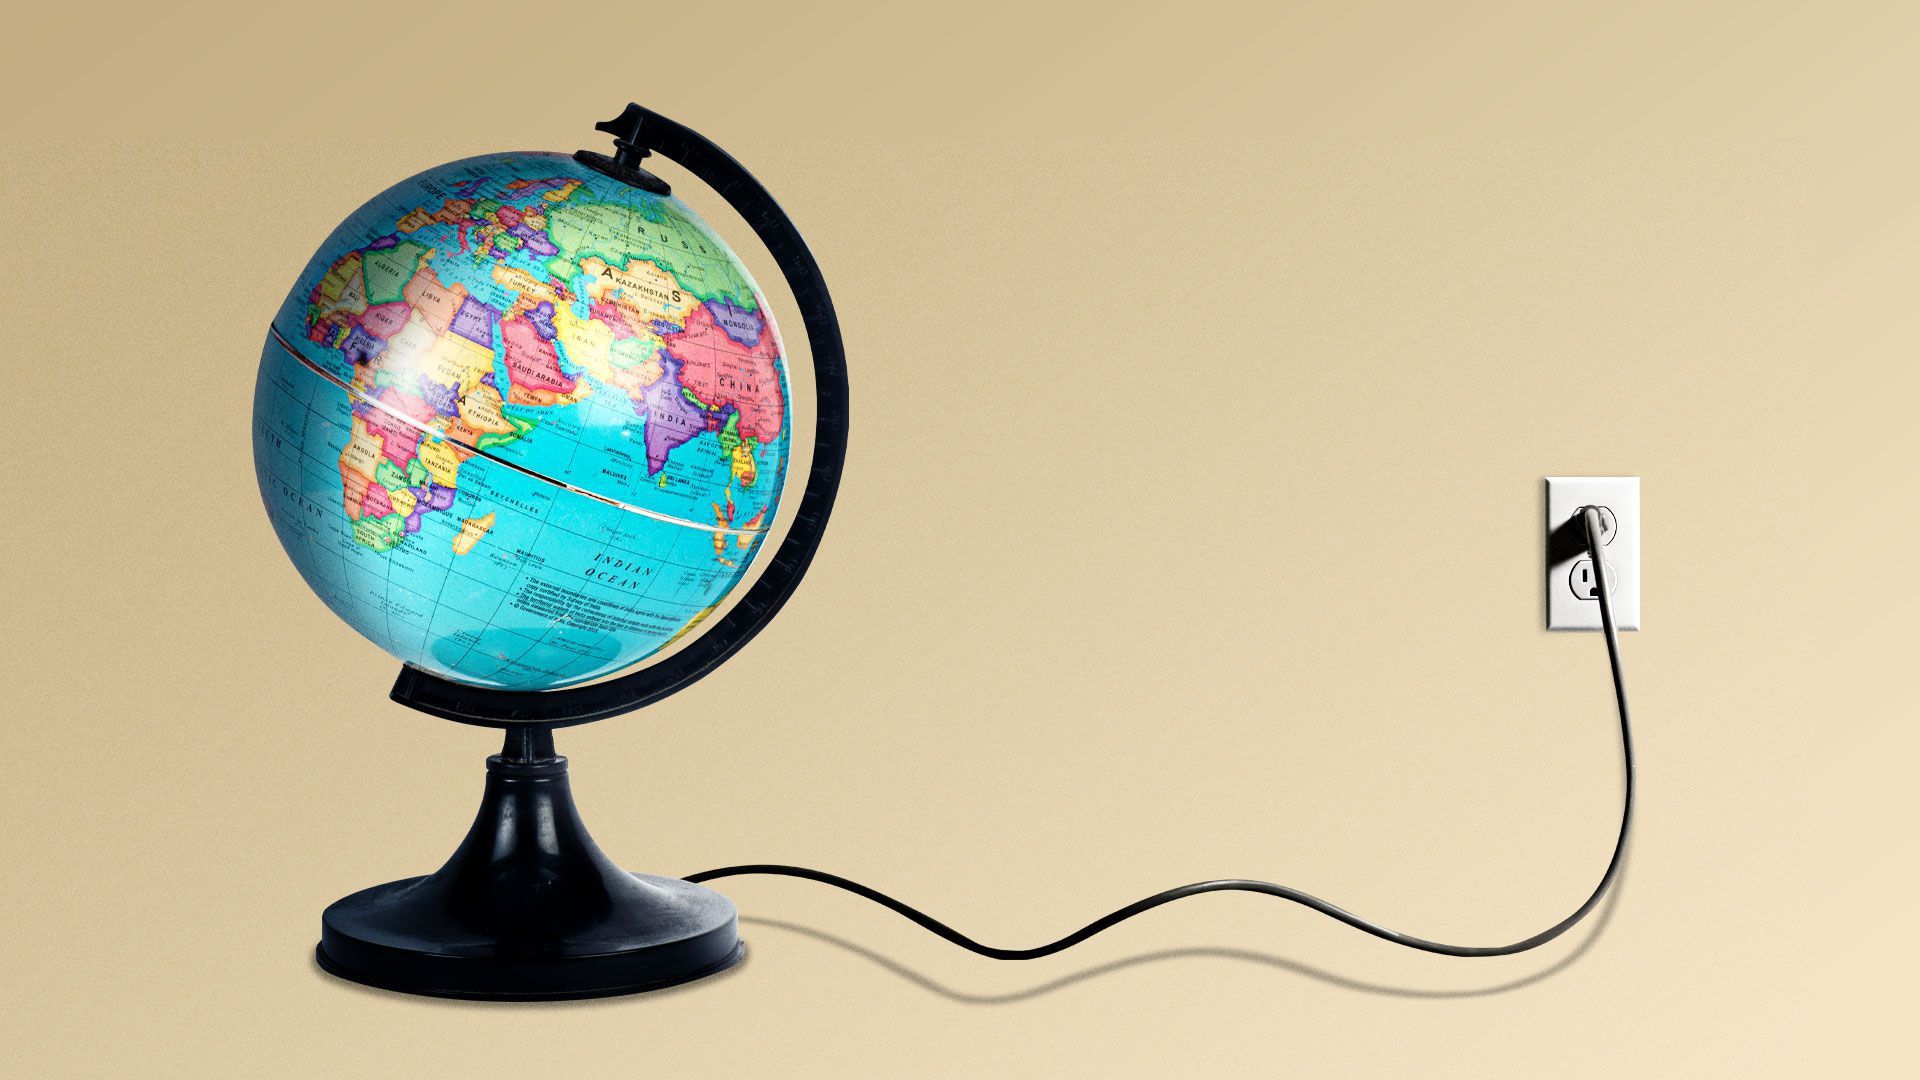 Illustration of a globe plugged into a wall socket.